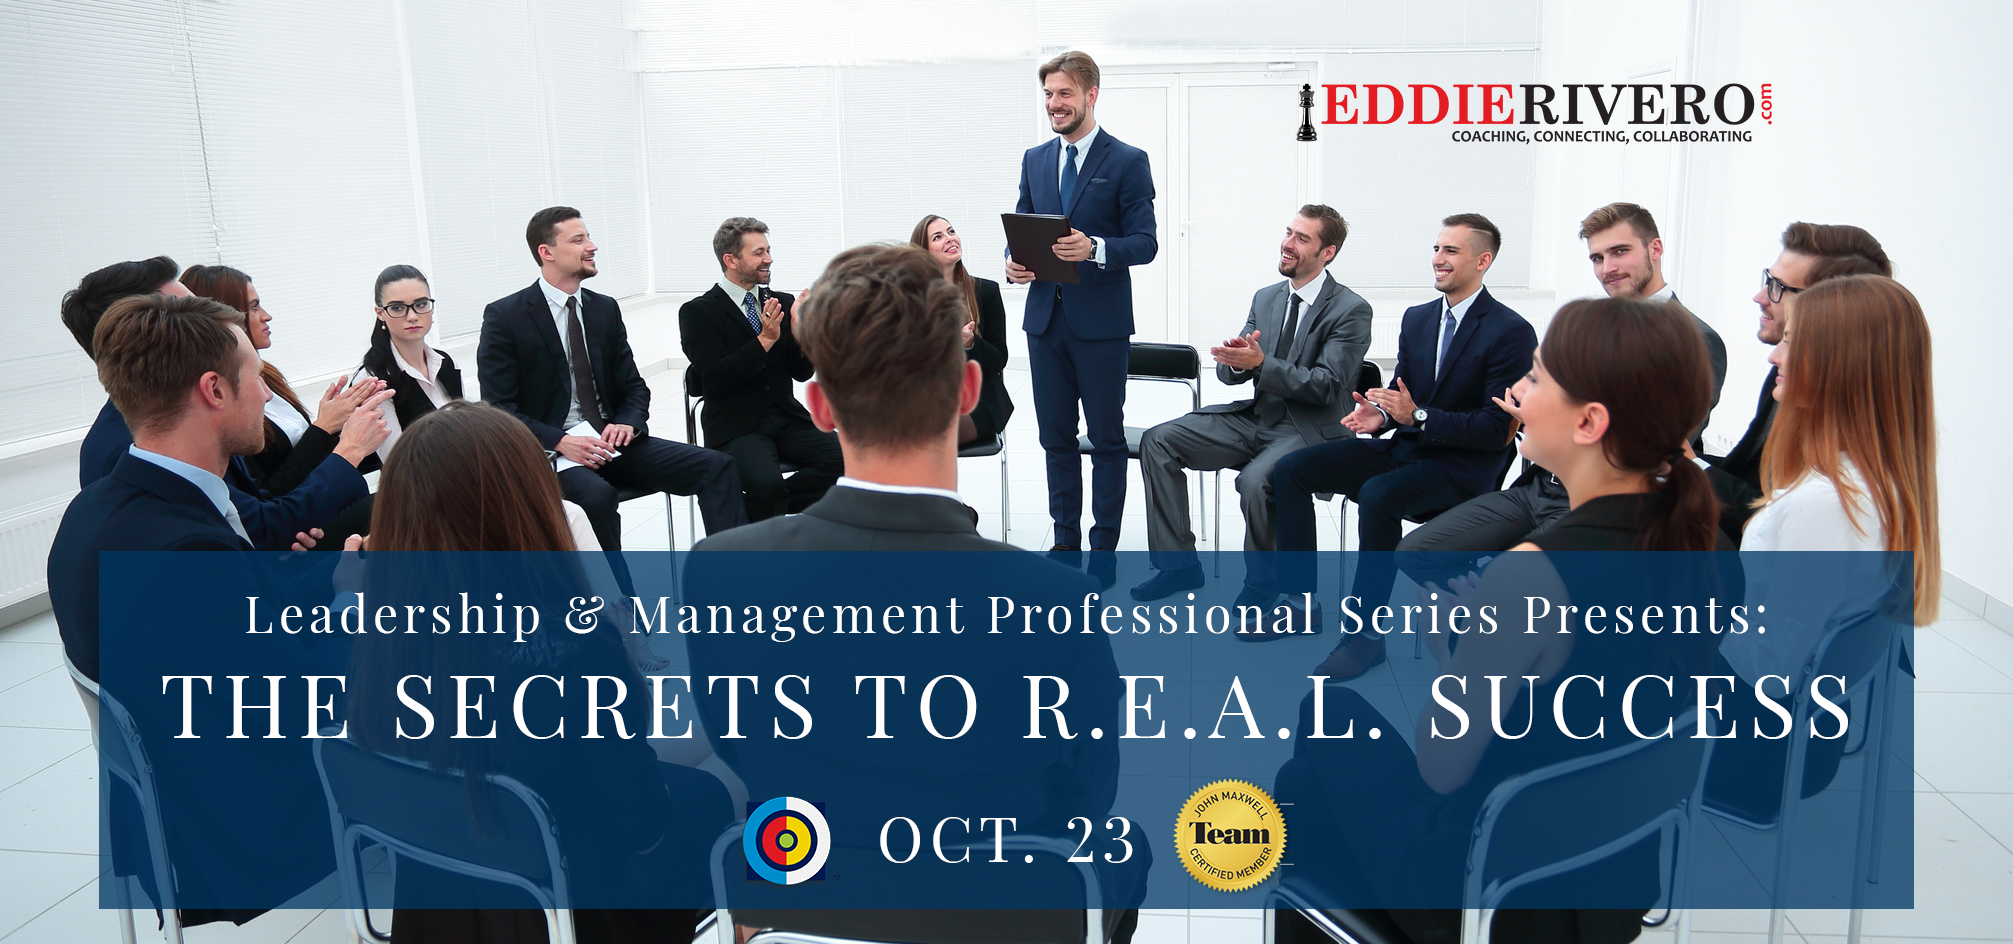 Leadership & Management Professional Series Presents:  THE SECRETS TO R.E.A.L. SUCCESS, Miami-Dade, Florida, United States